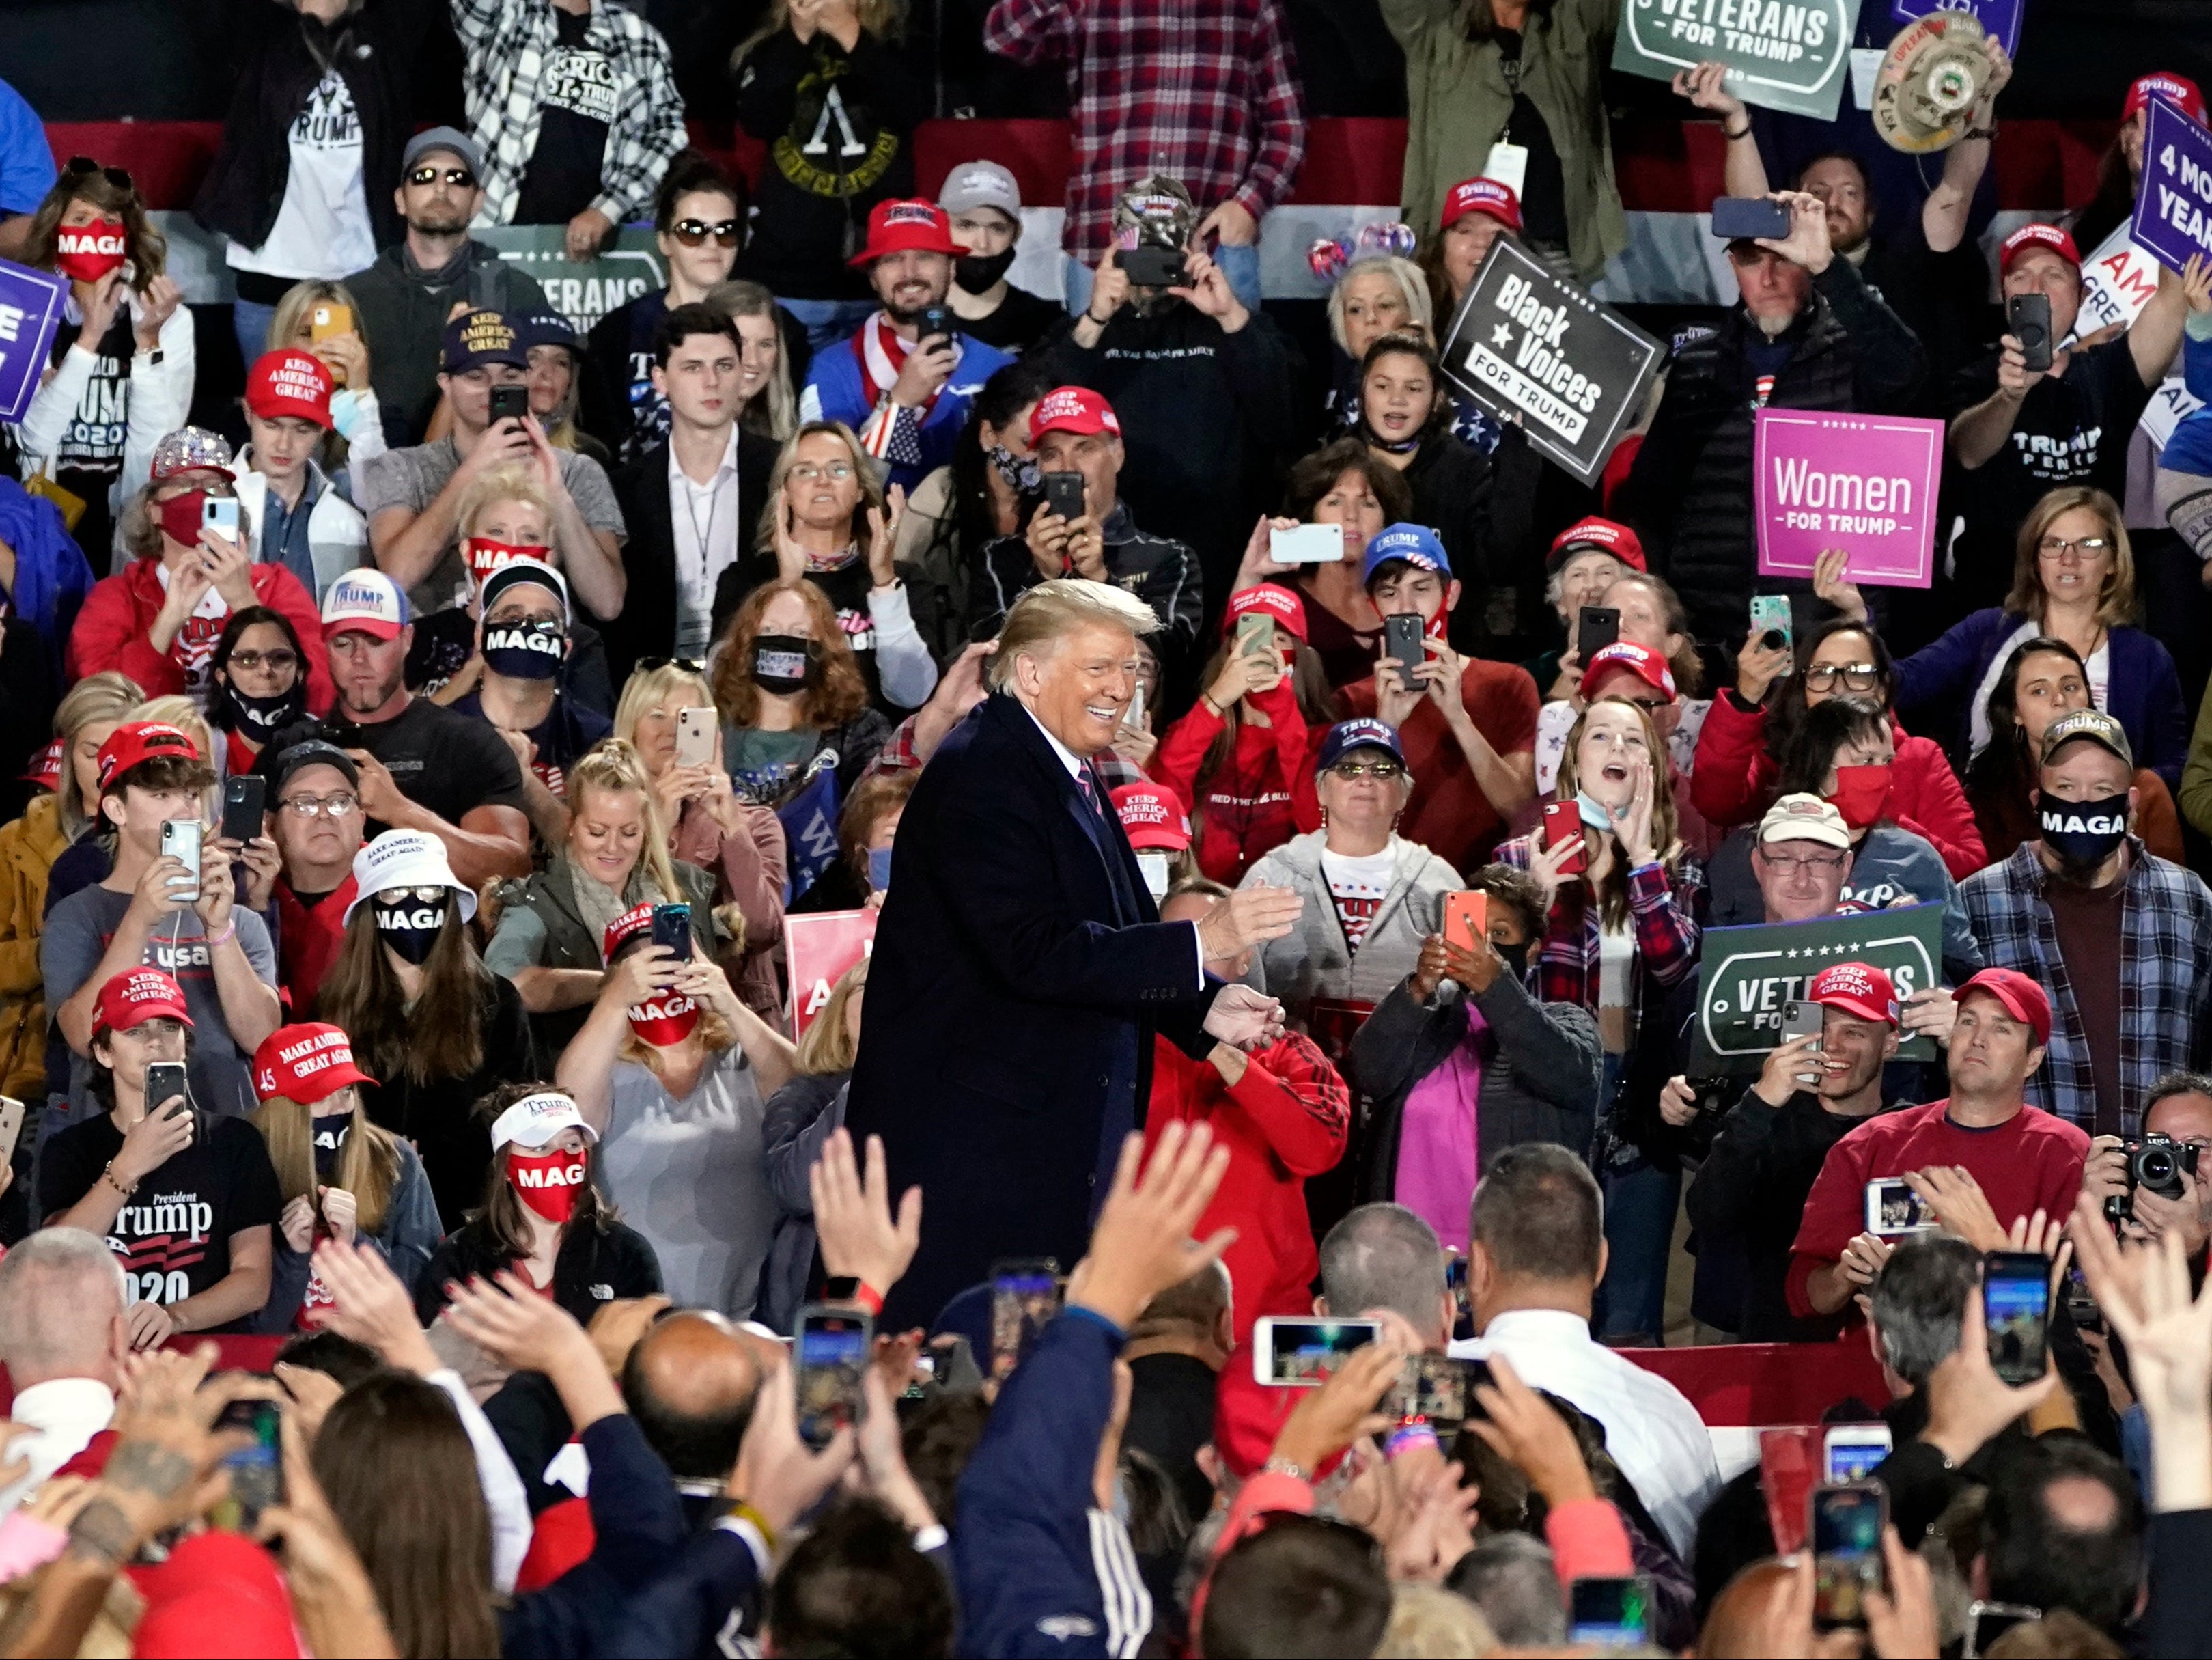 Donald Trump, surrounded by supporters, at a campaign rally.